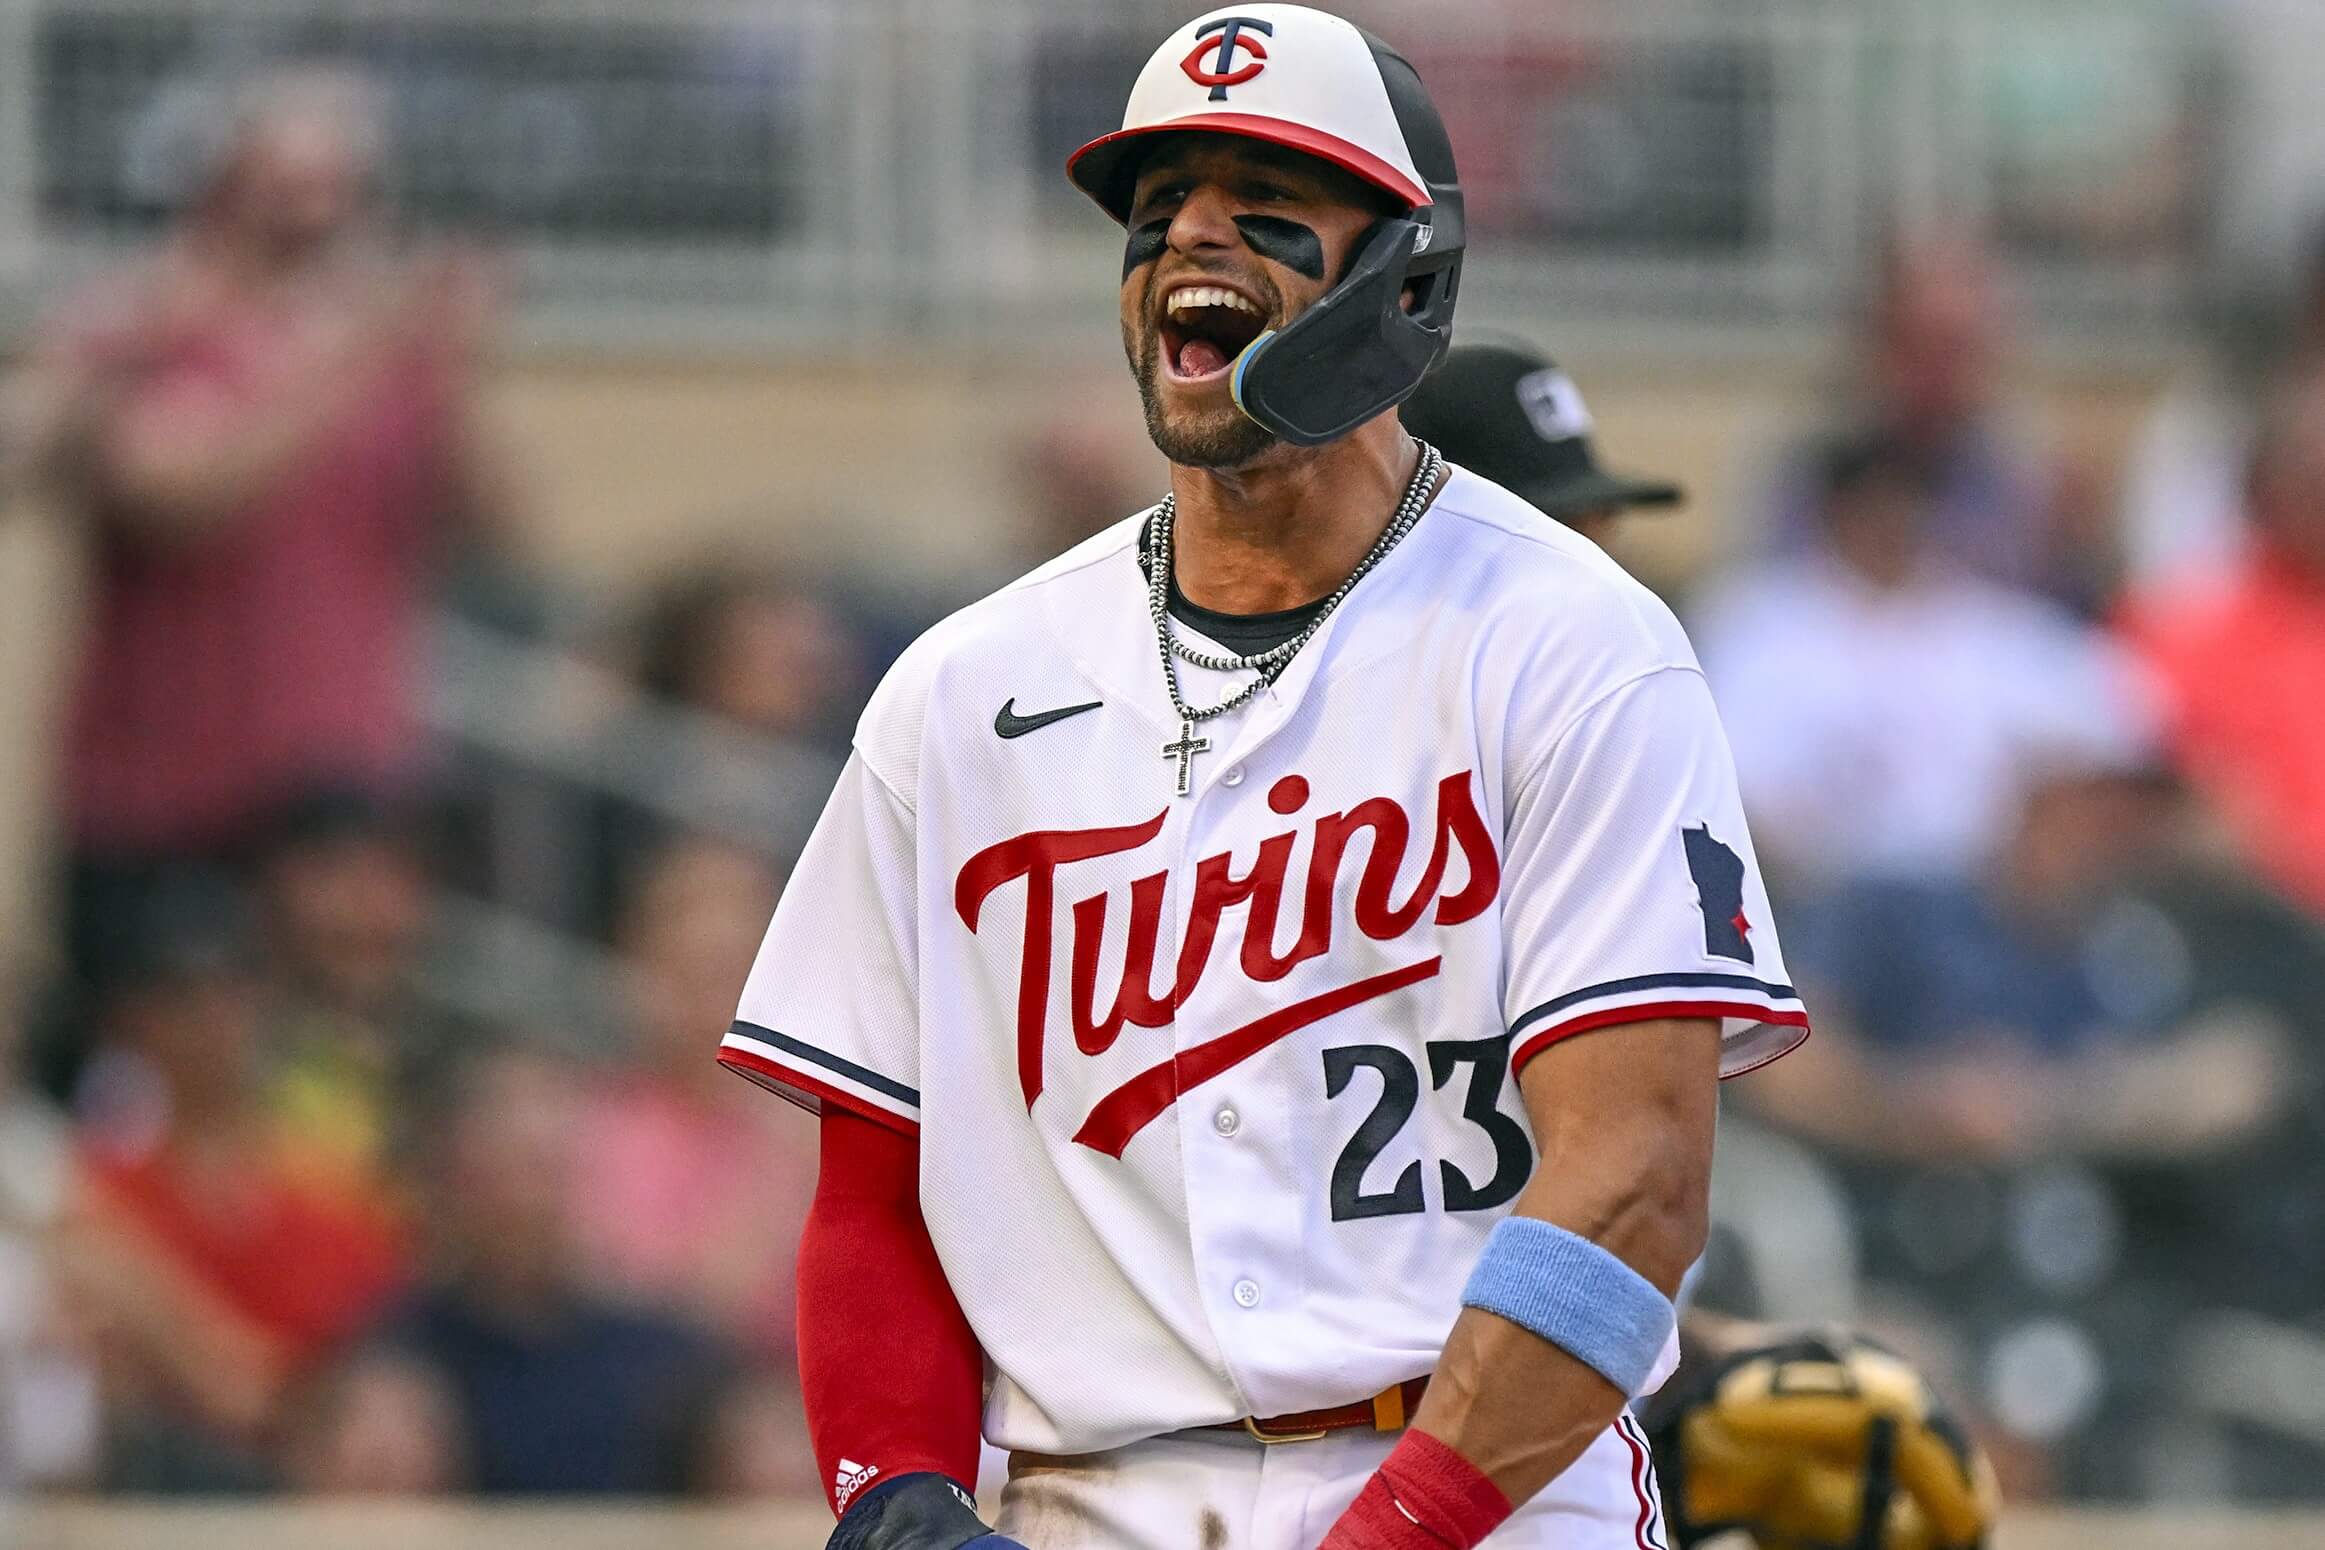 Playing favorites: What's the story behind Twins' jersey picks?